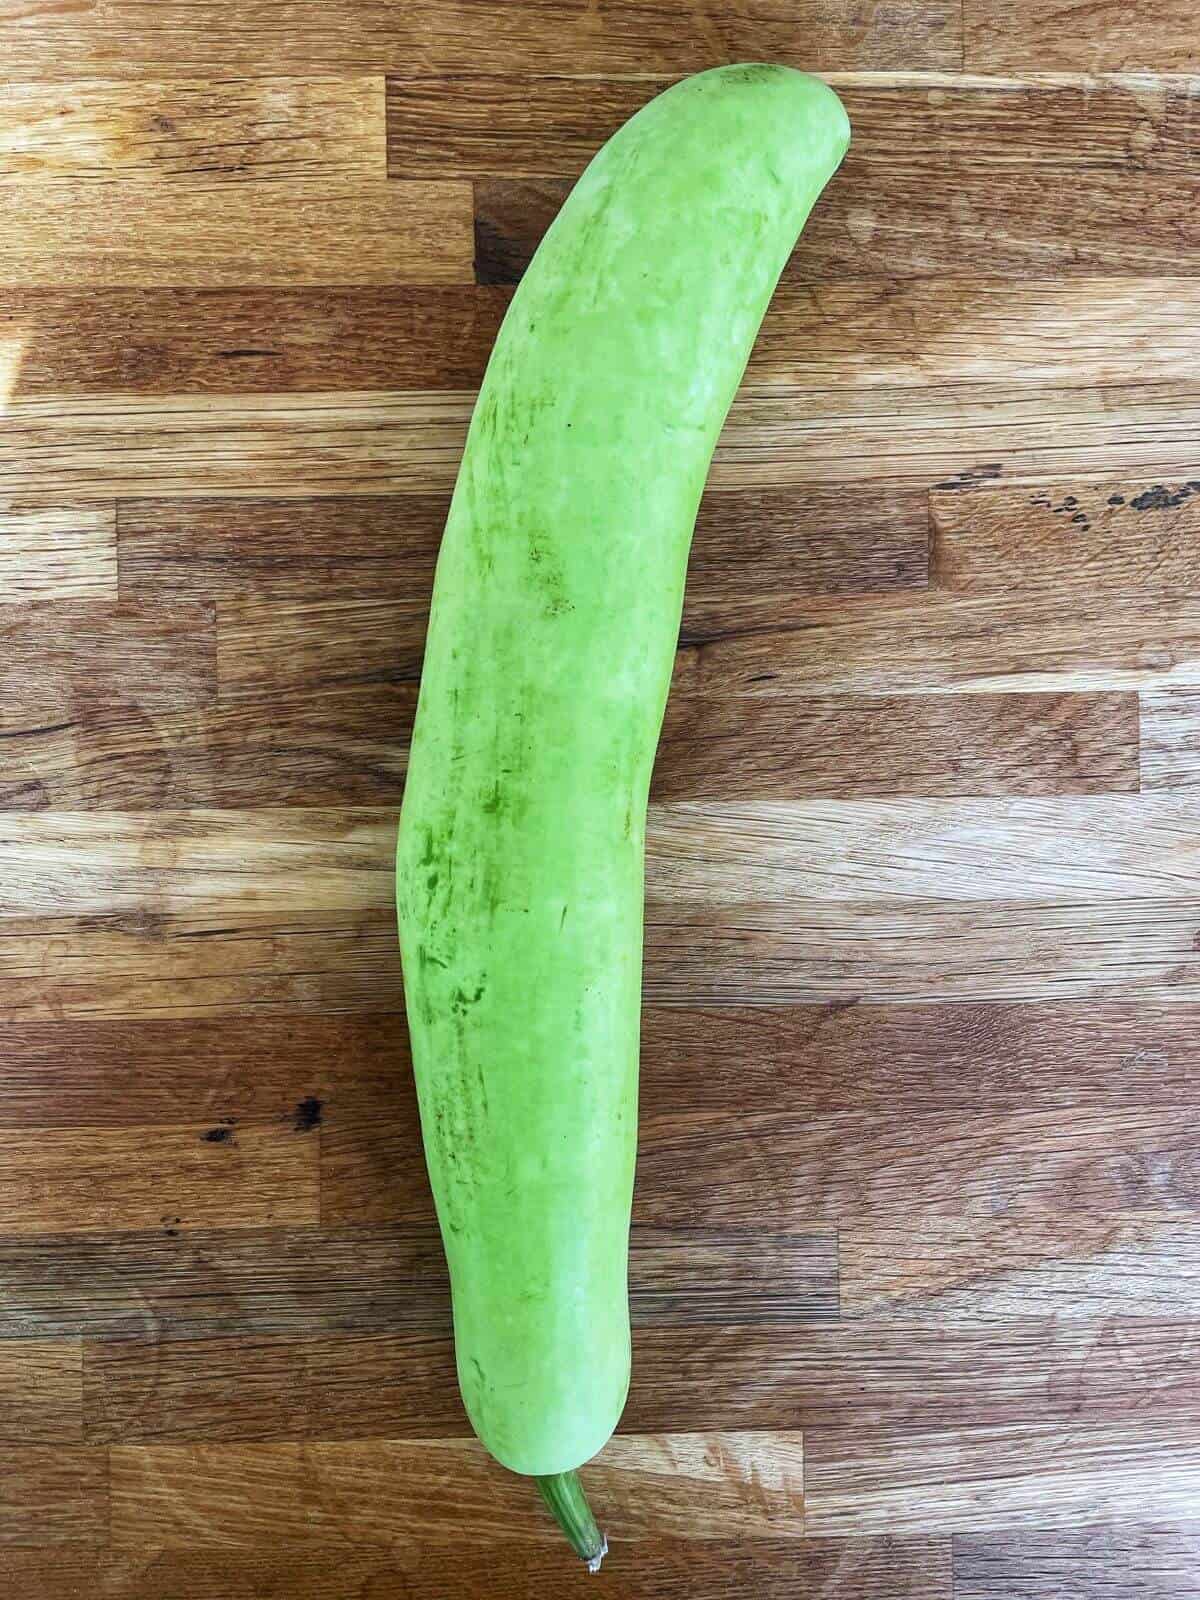 A whole bottle gourd on a cutting board. 